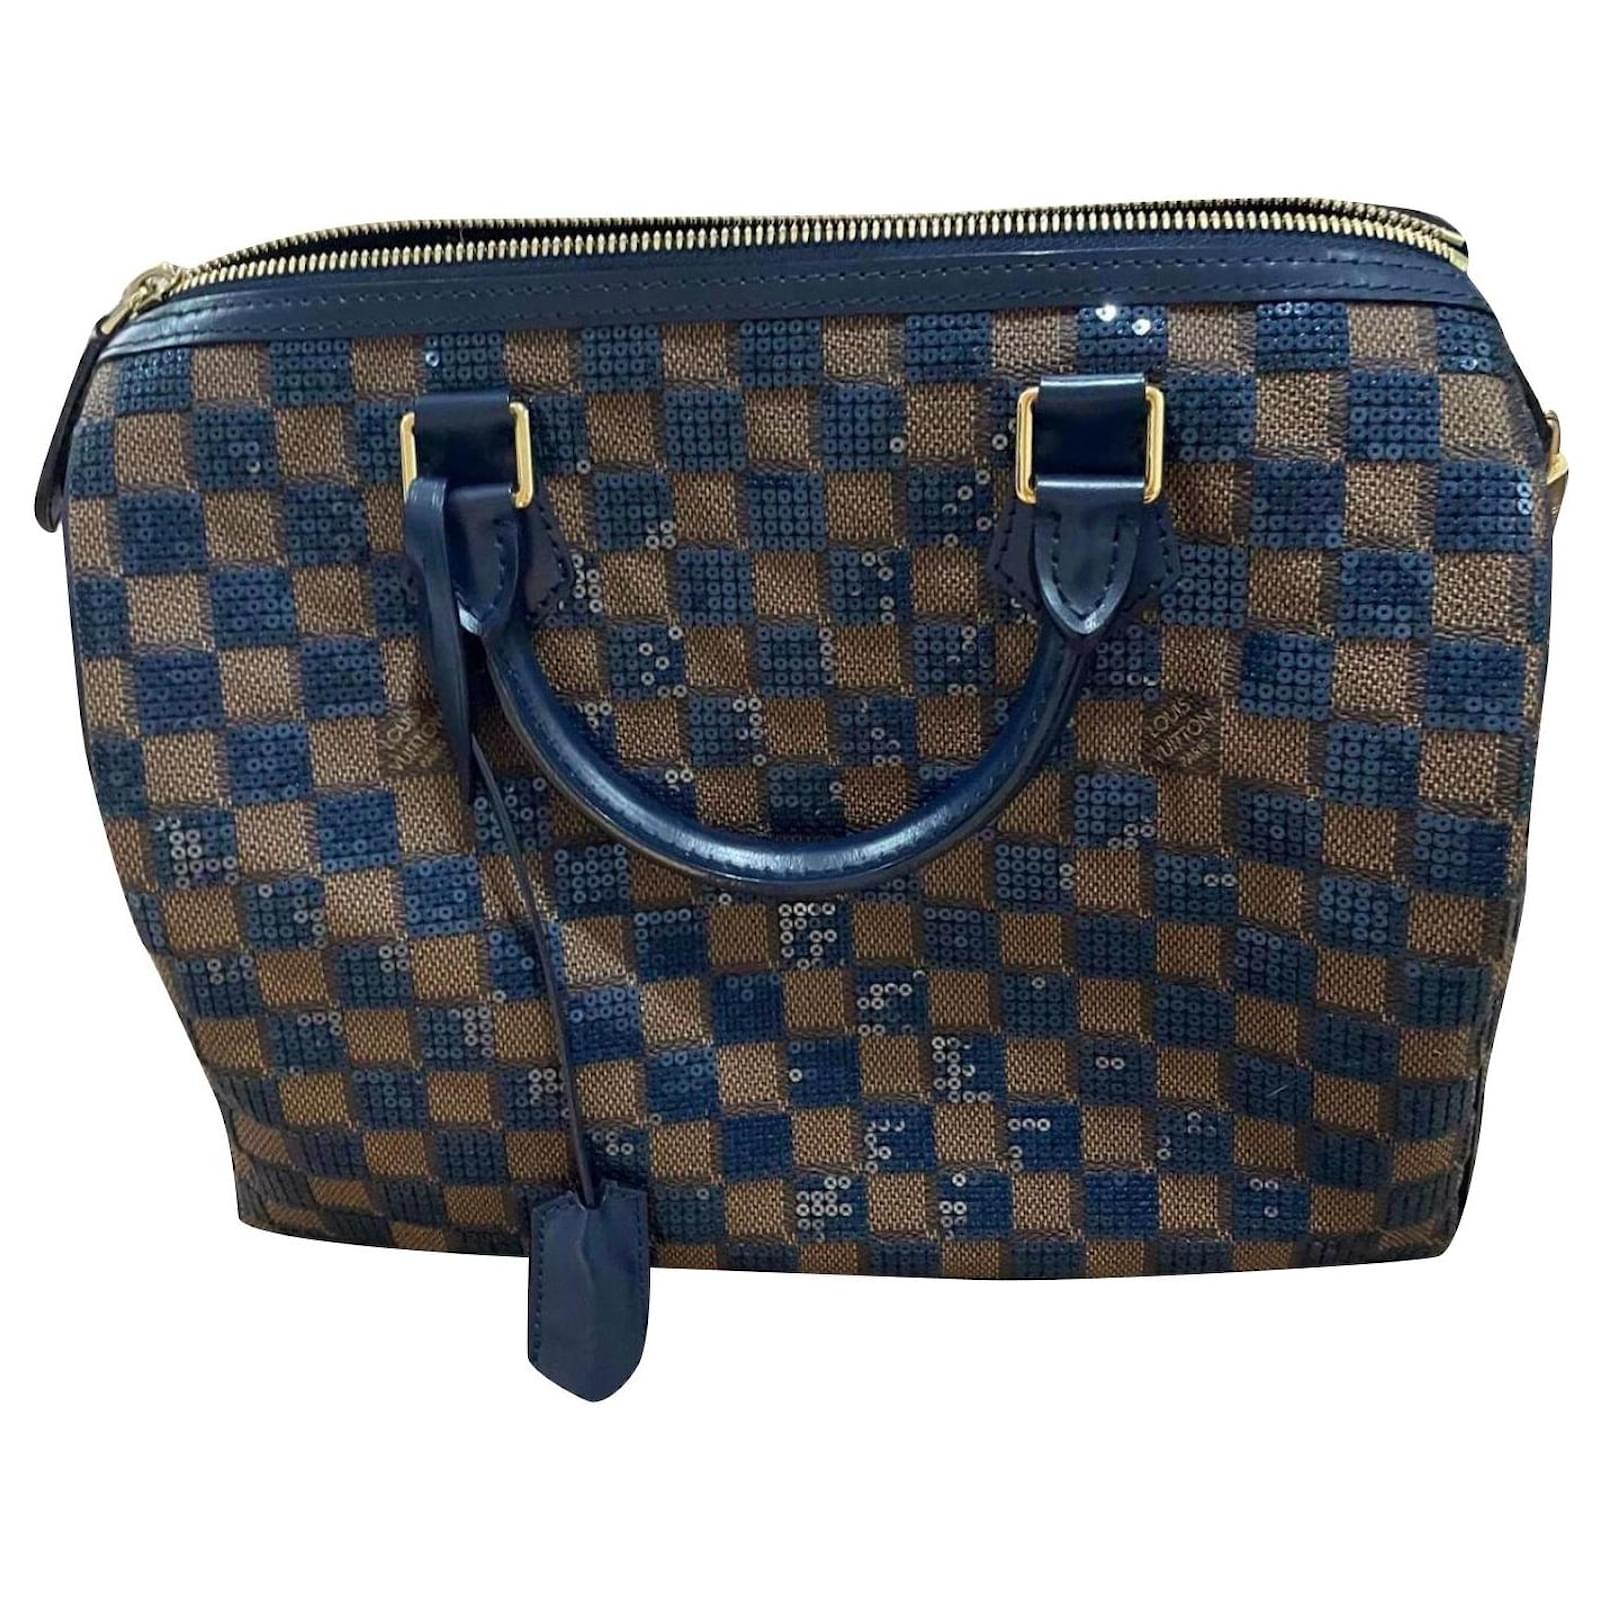 limited edition lv bags 2021